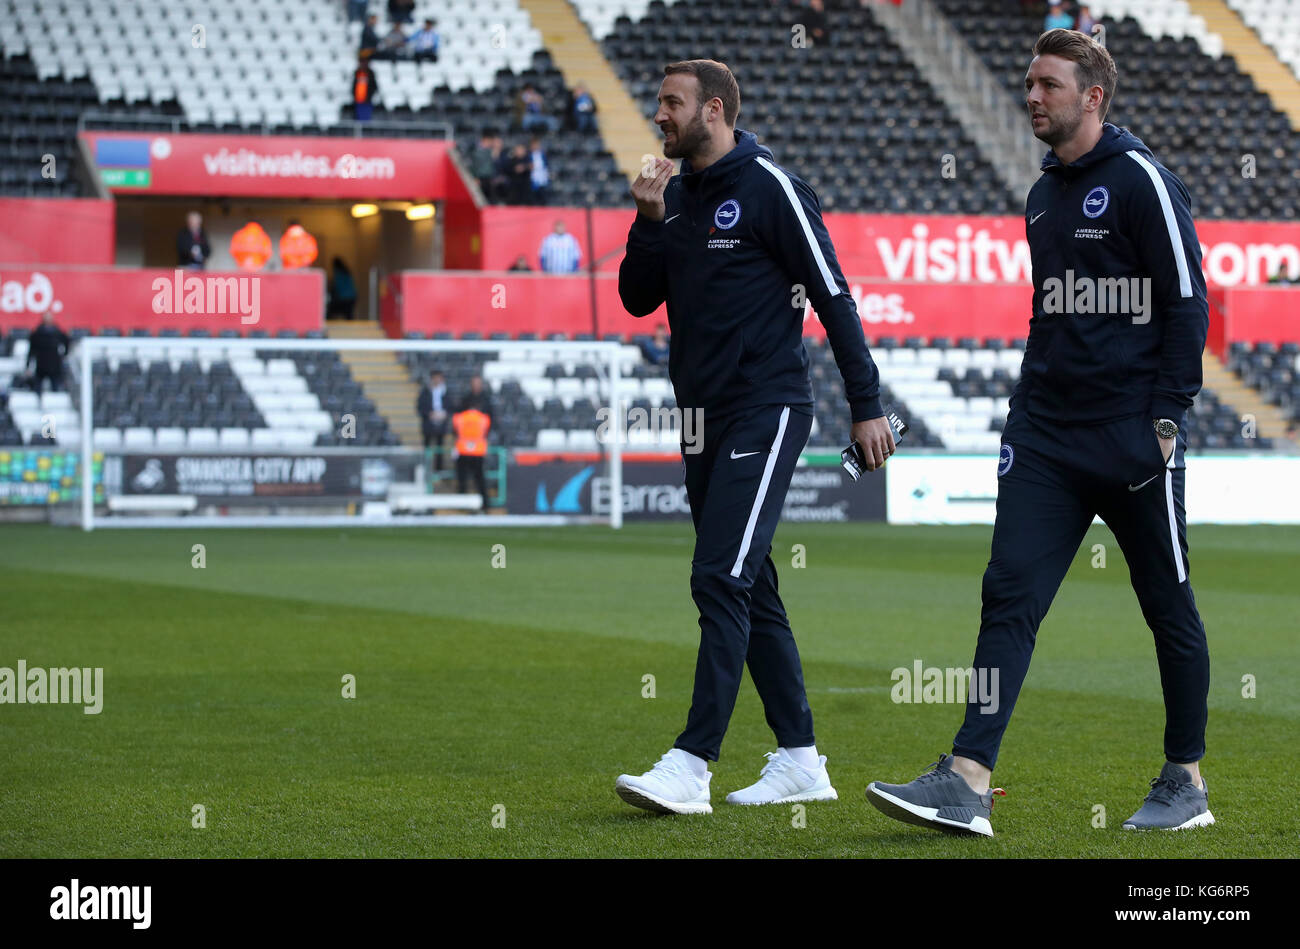 Brighton & Hove Albion's Glenn Murray and Dale Stephens during the Premier League match at the Libert Stadium, Swansea. Stock Photo